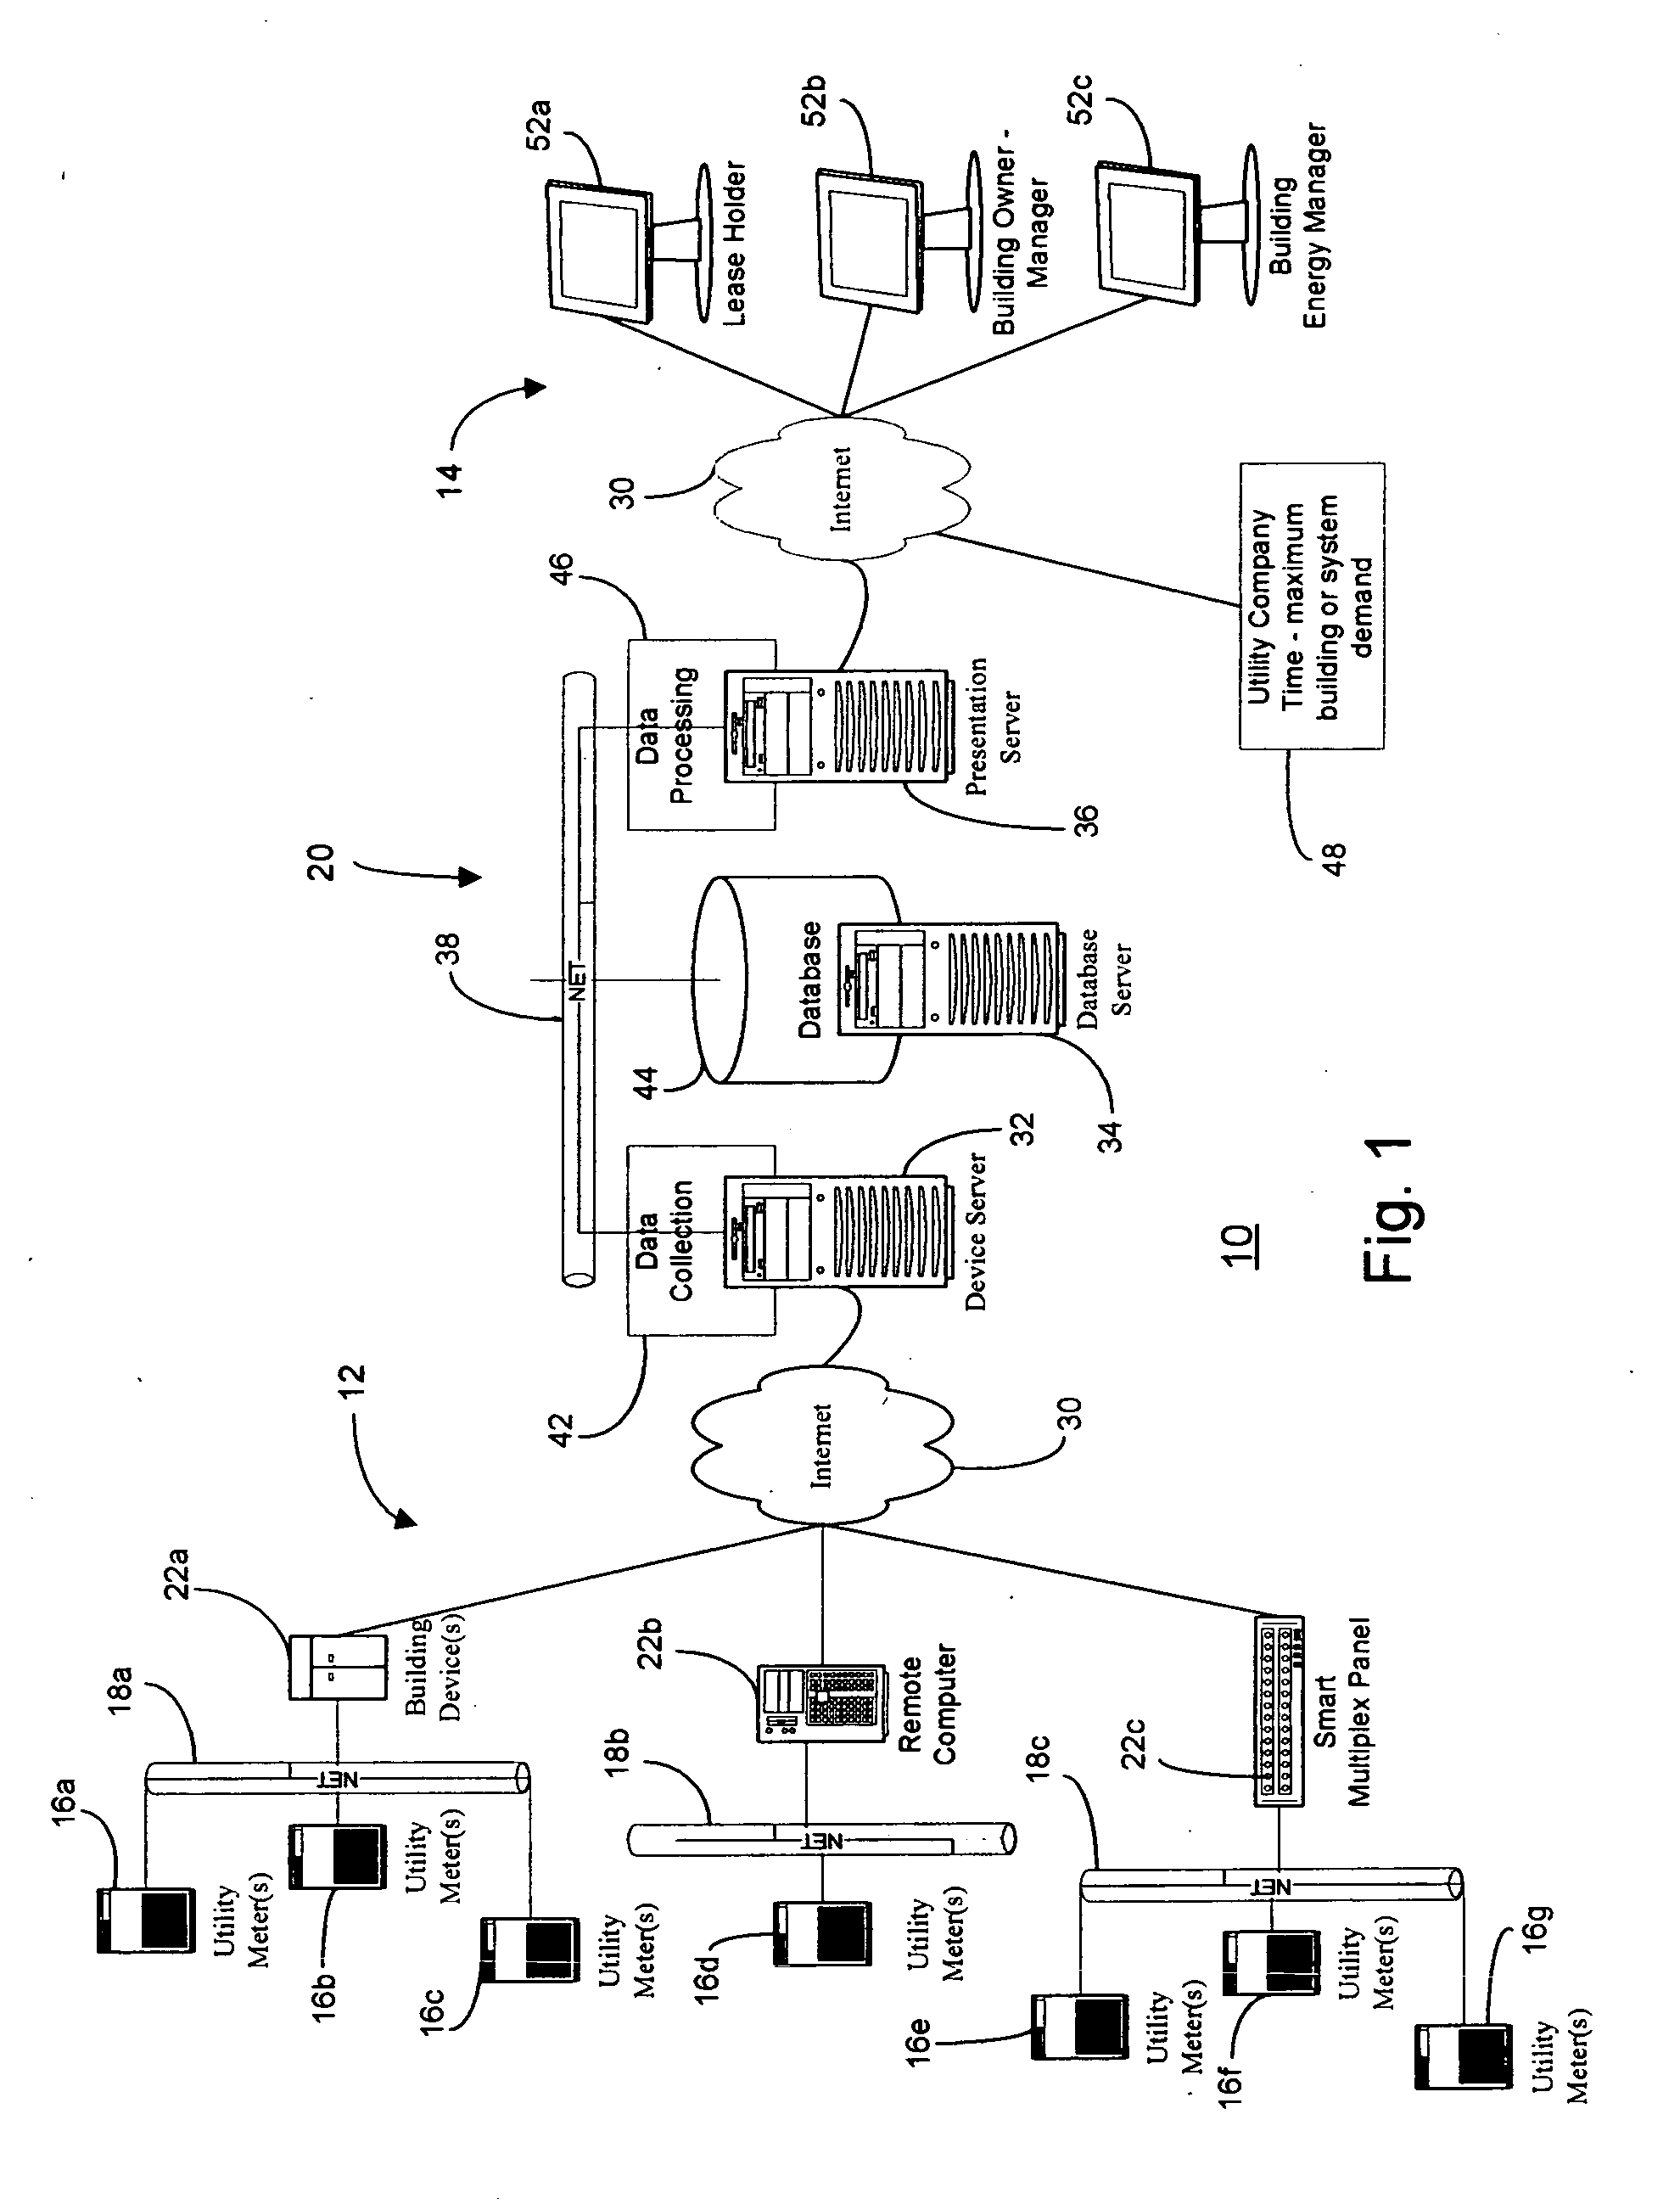 Electric power usage and demand reporting system